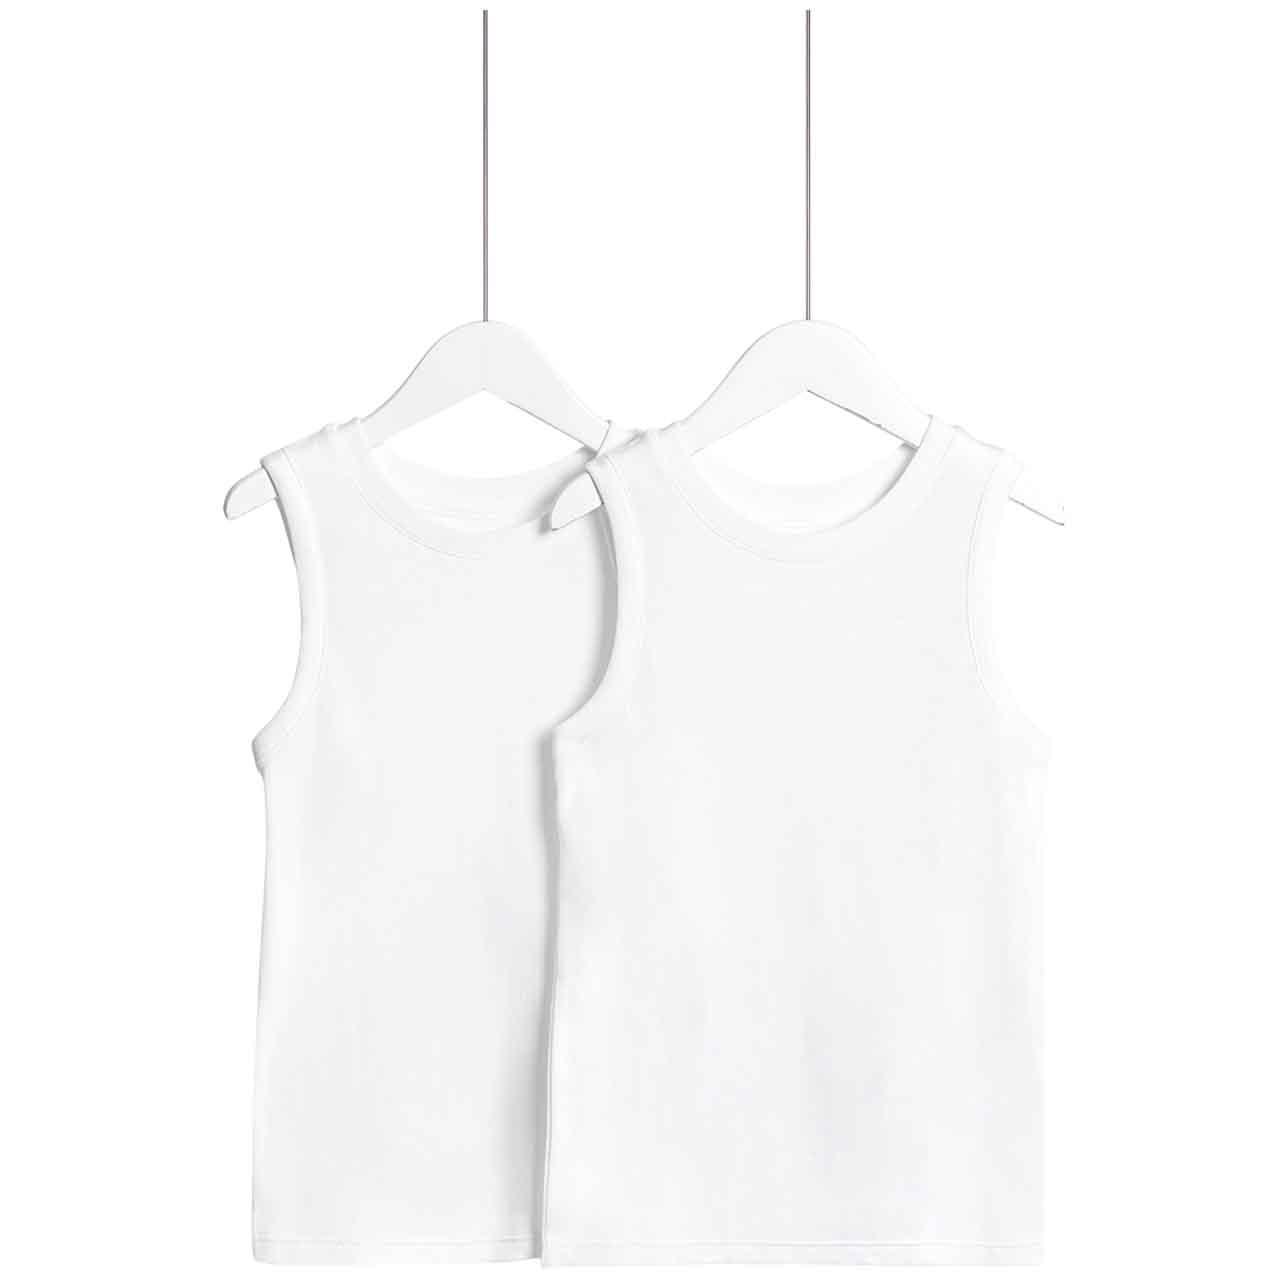 M&S Thermal Vest, 7-8 Years, White, 2 Pack 